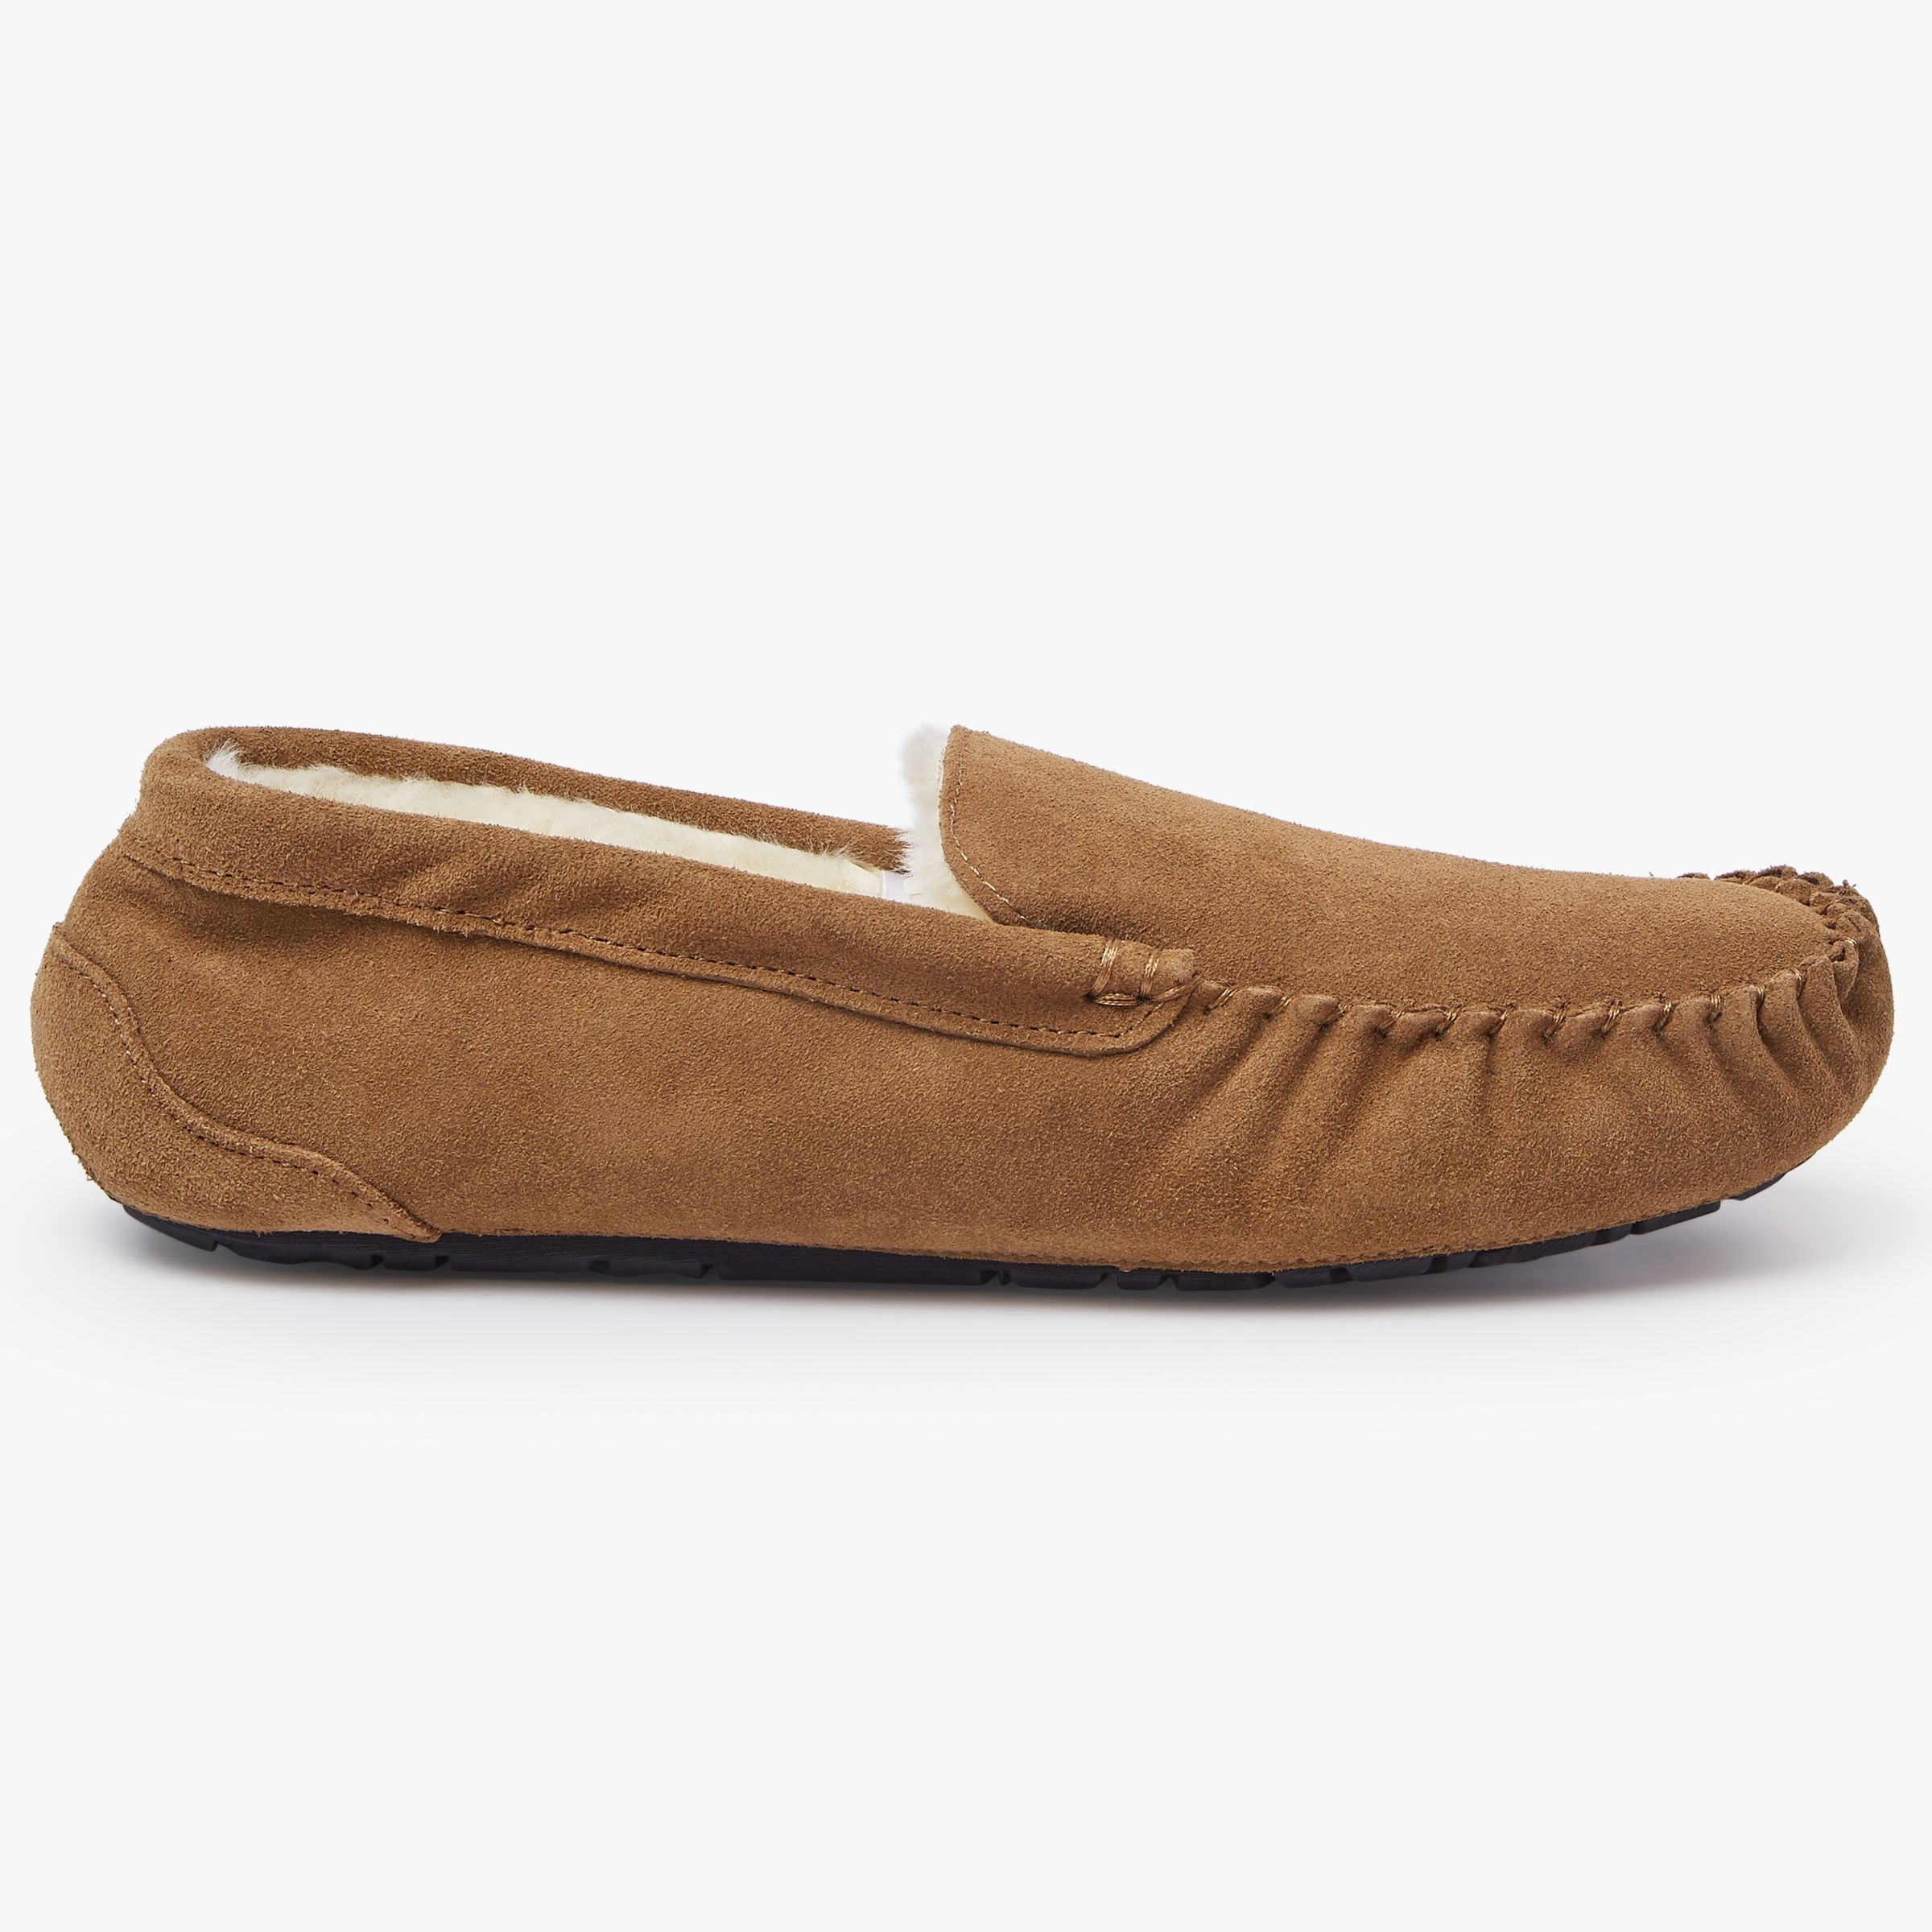 John Lewis & Partners Moccasin Faux Fur Lined Slippers, Chestnut, 9